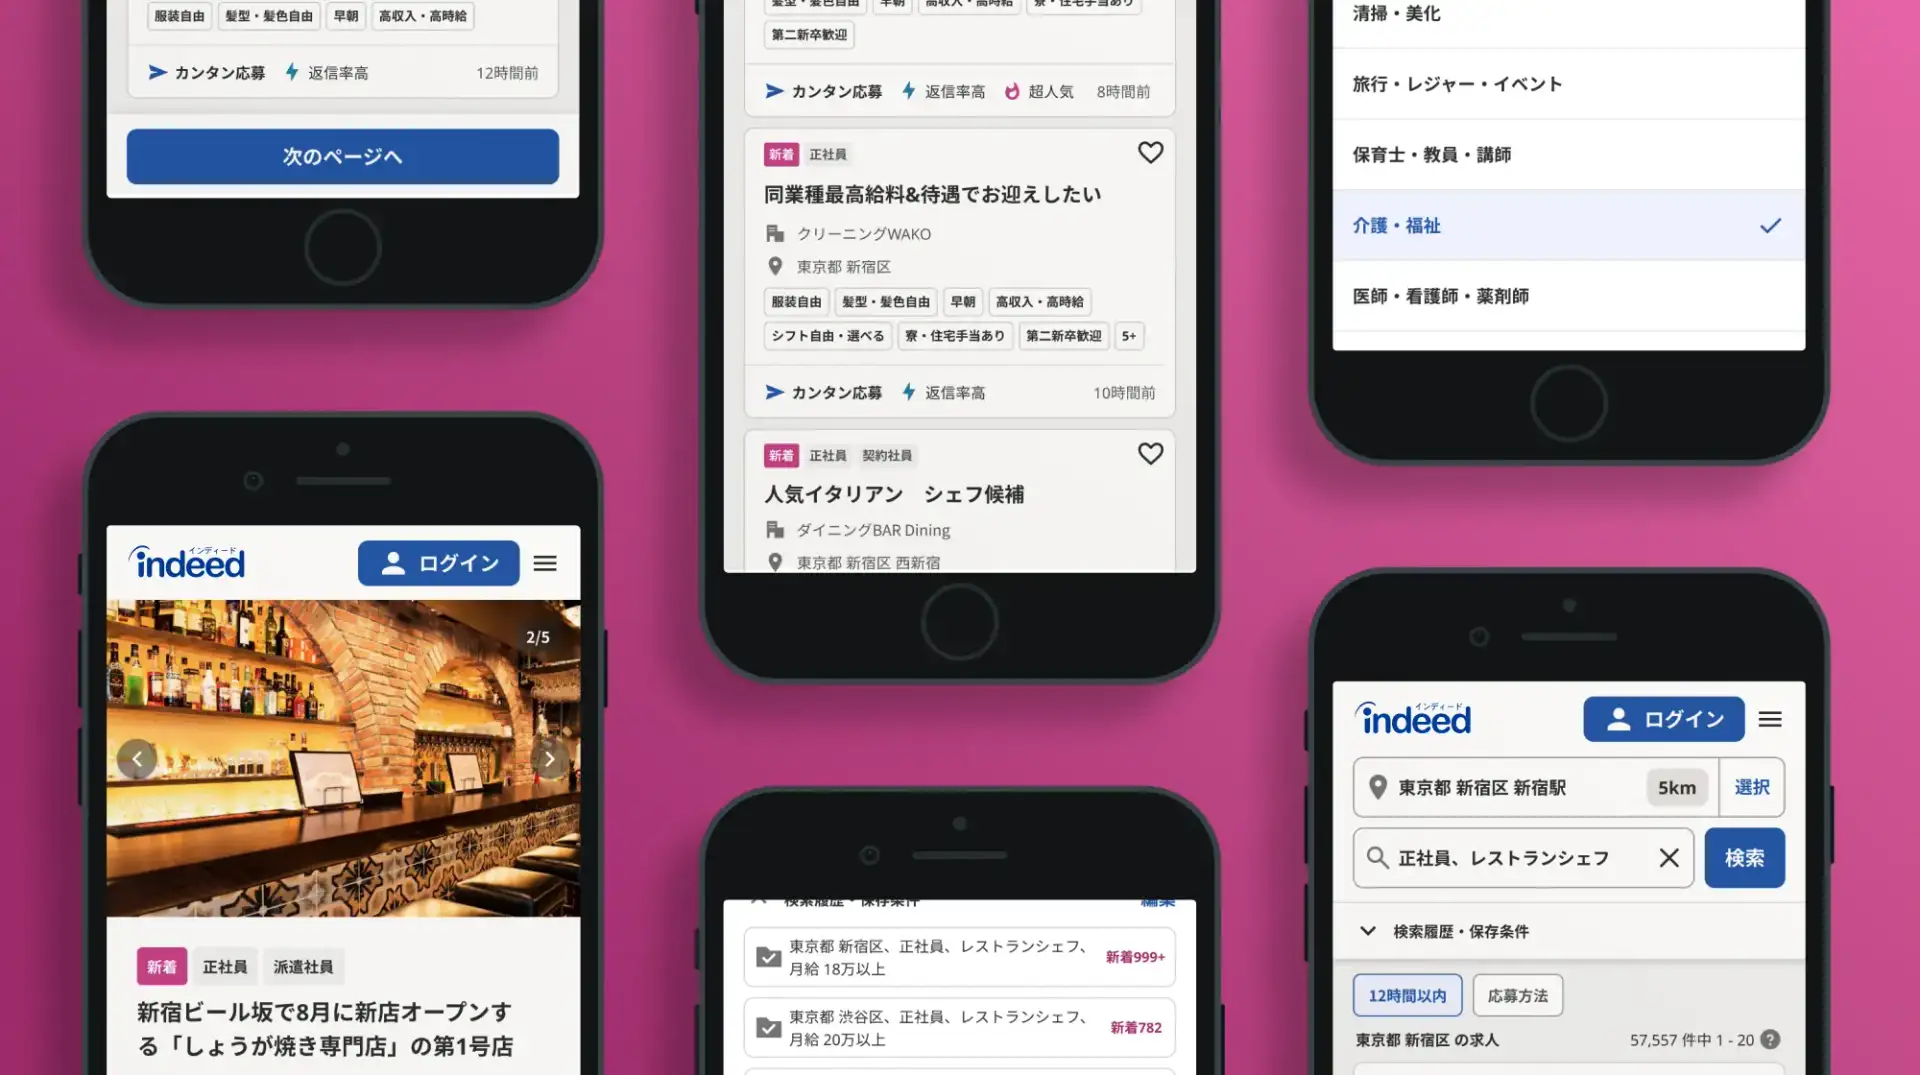 Smartphone screens show Indeed’s products in Japanese using Noto Sans type